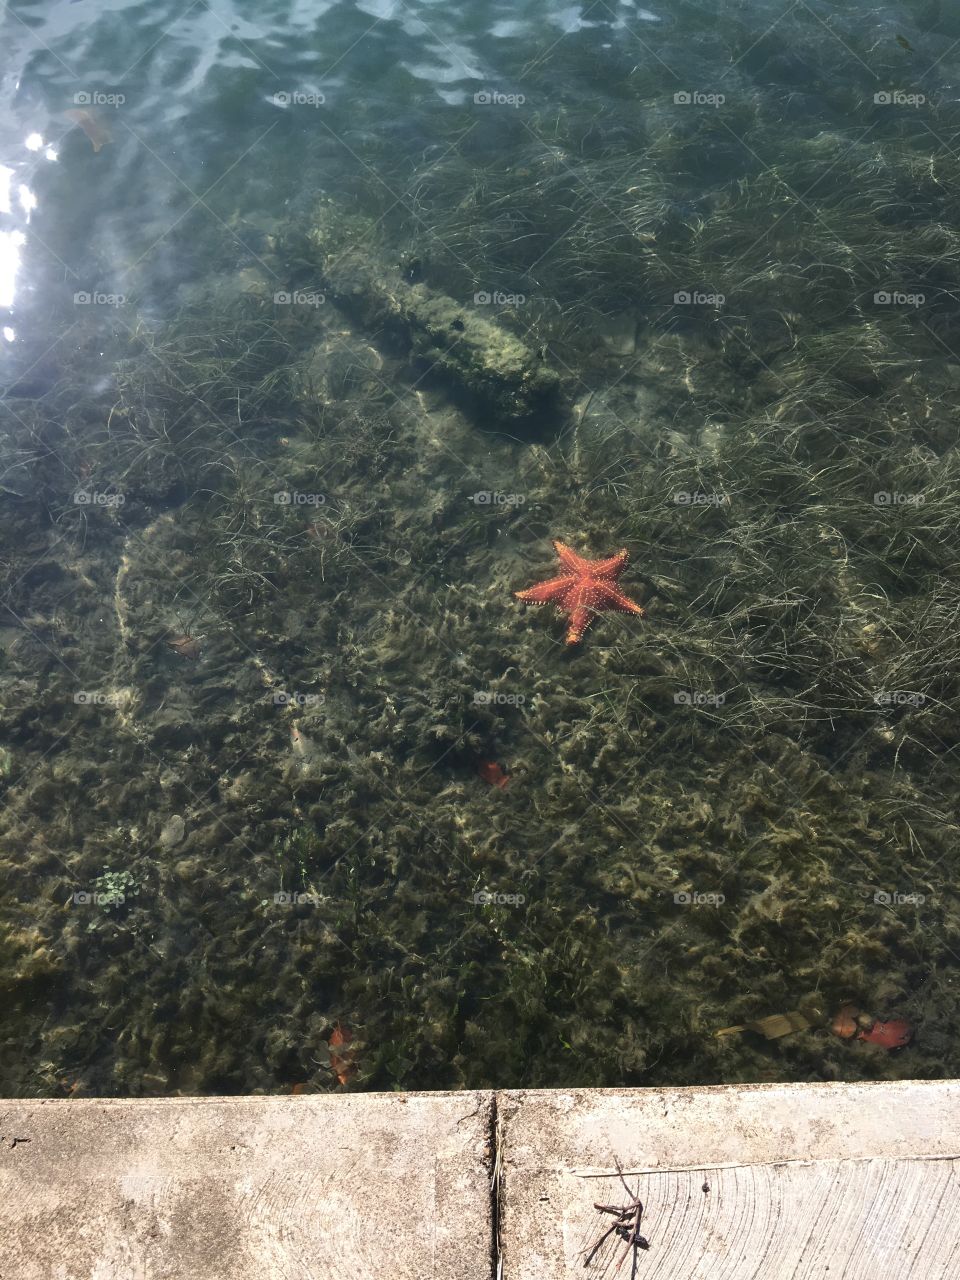 Red starfish in clear waters